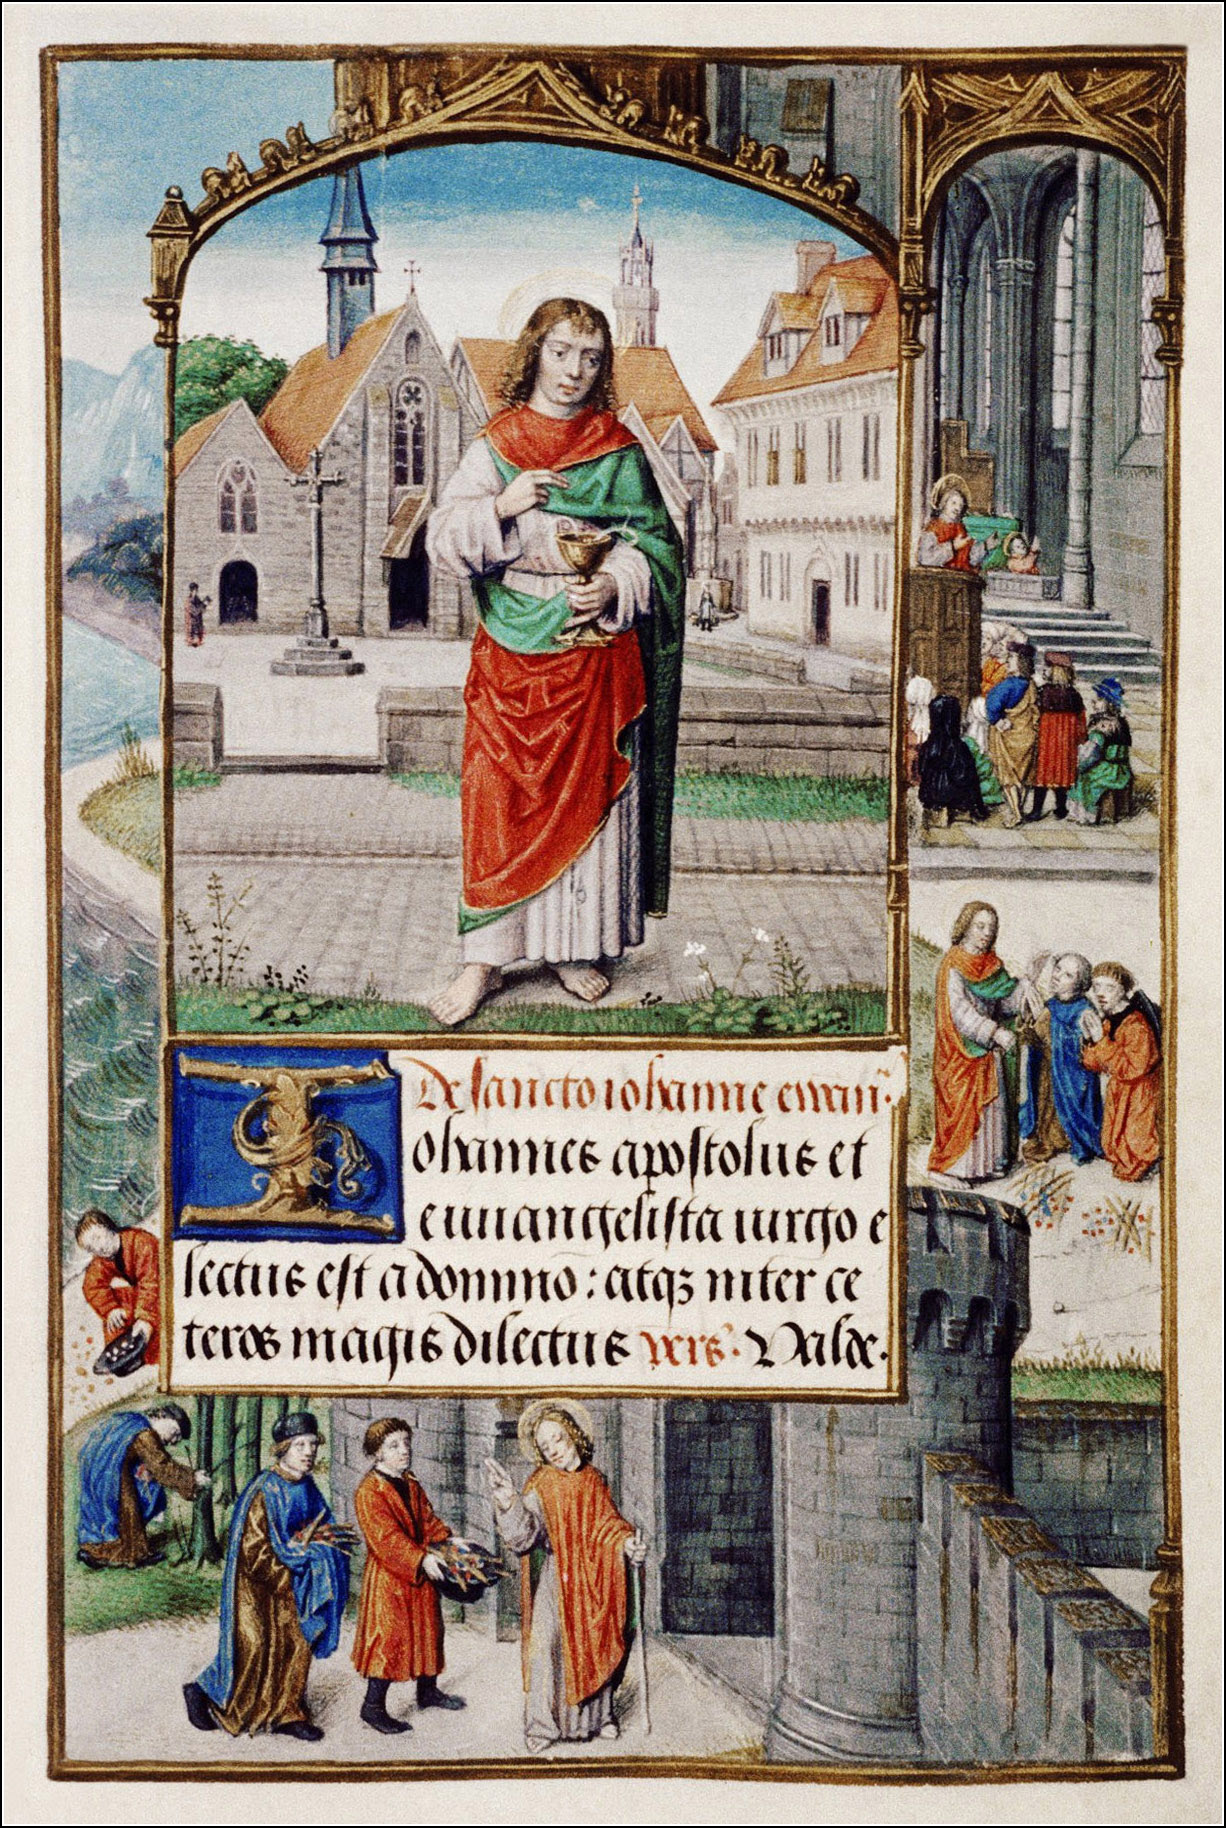 Book of Hours. Use of Rome.